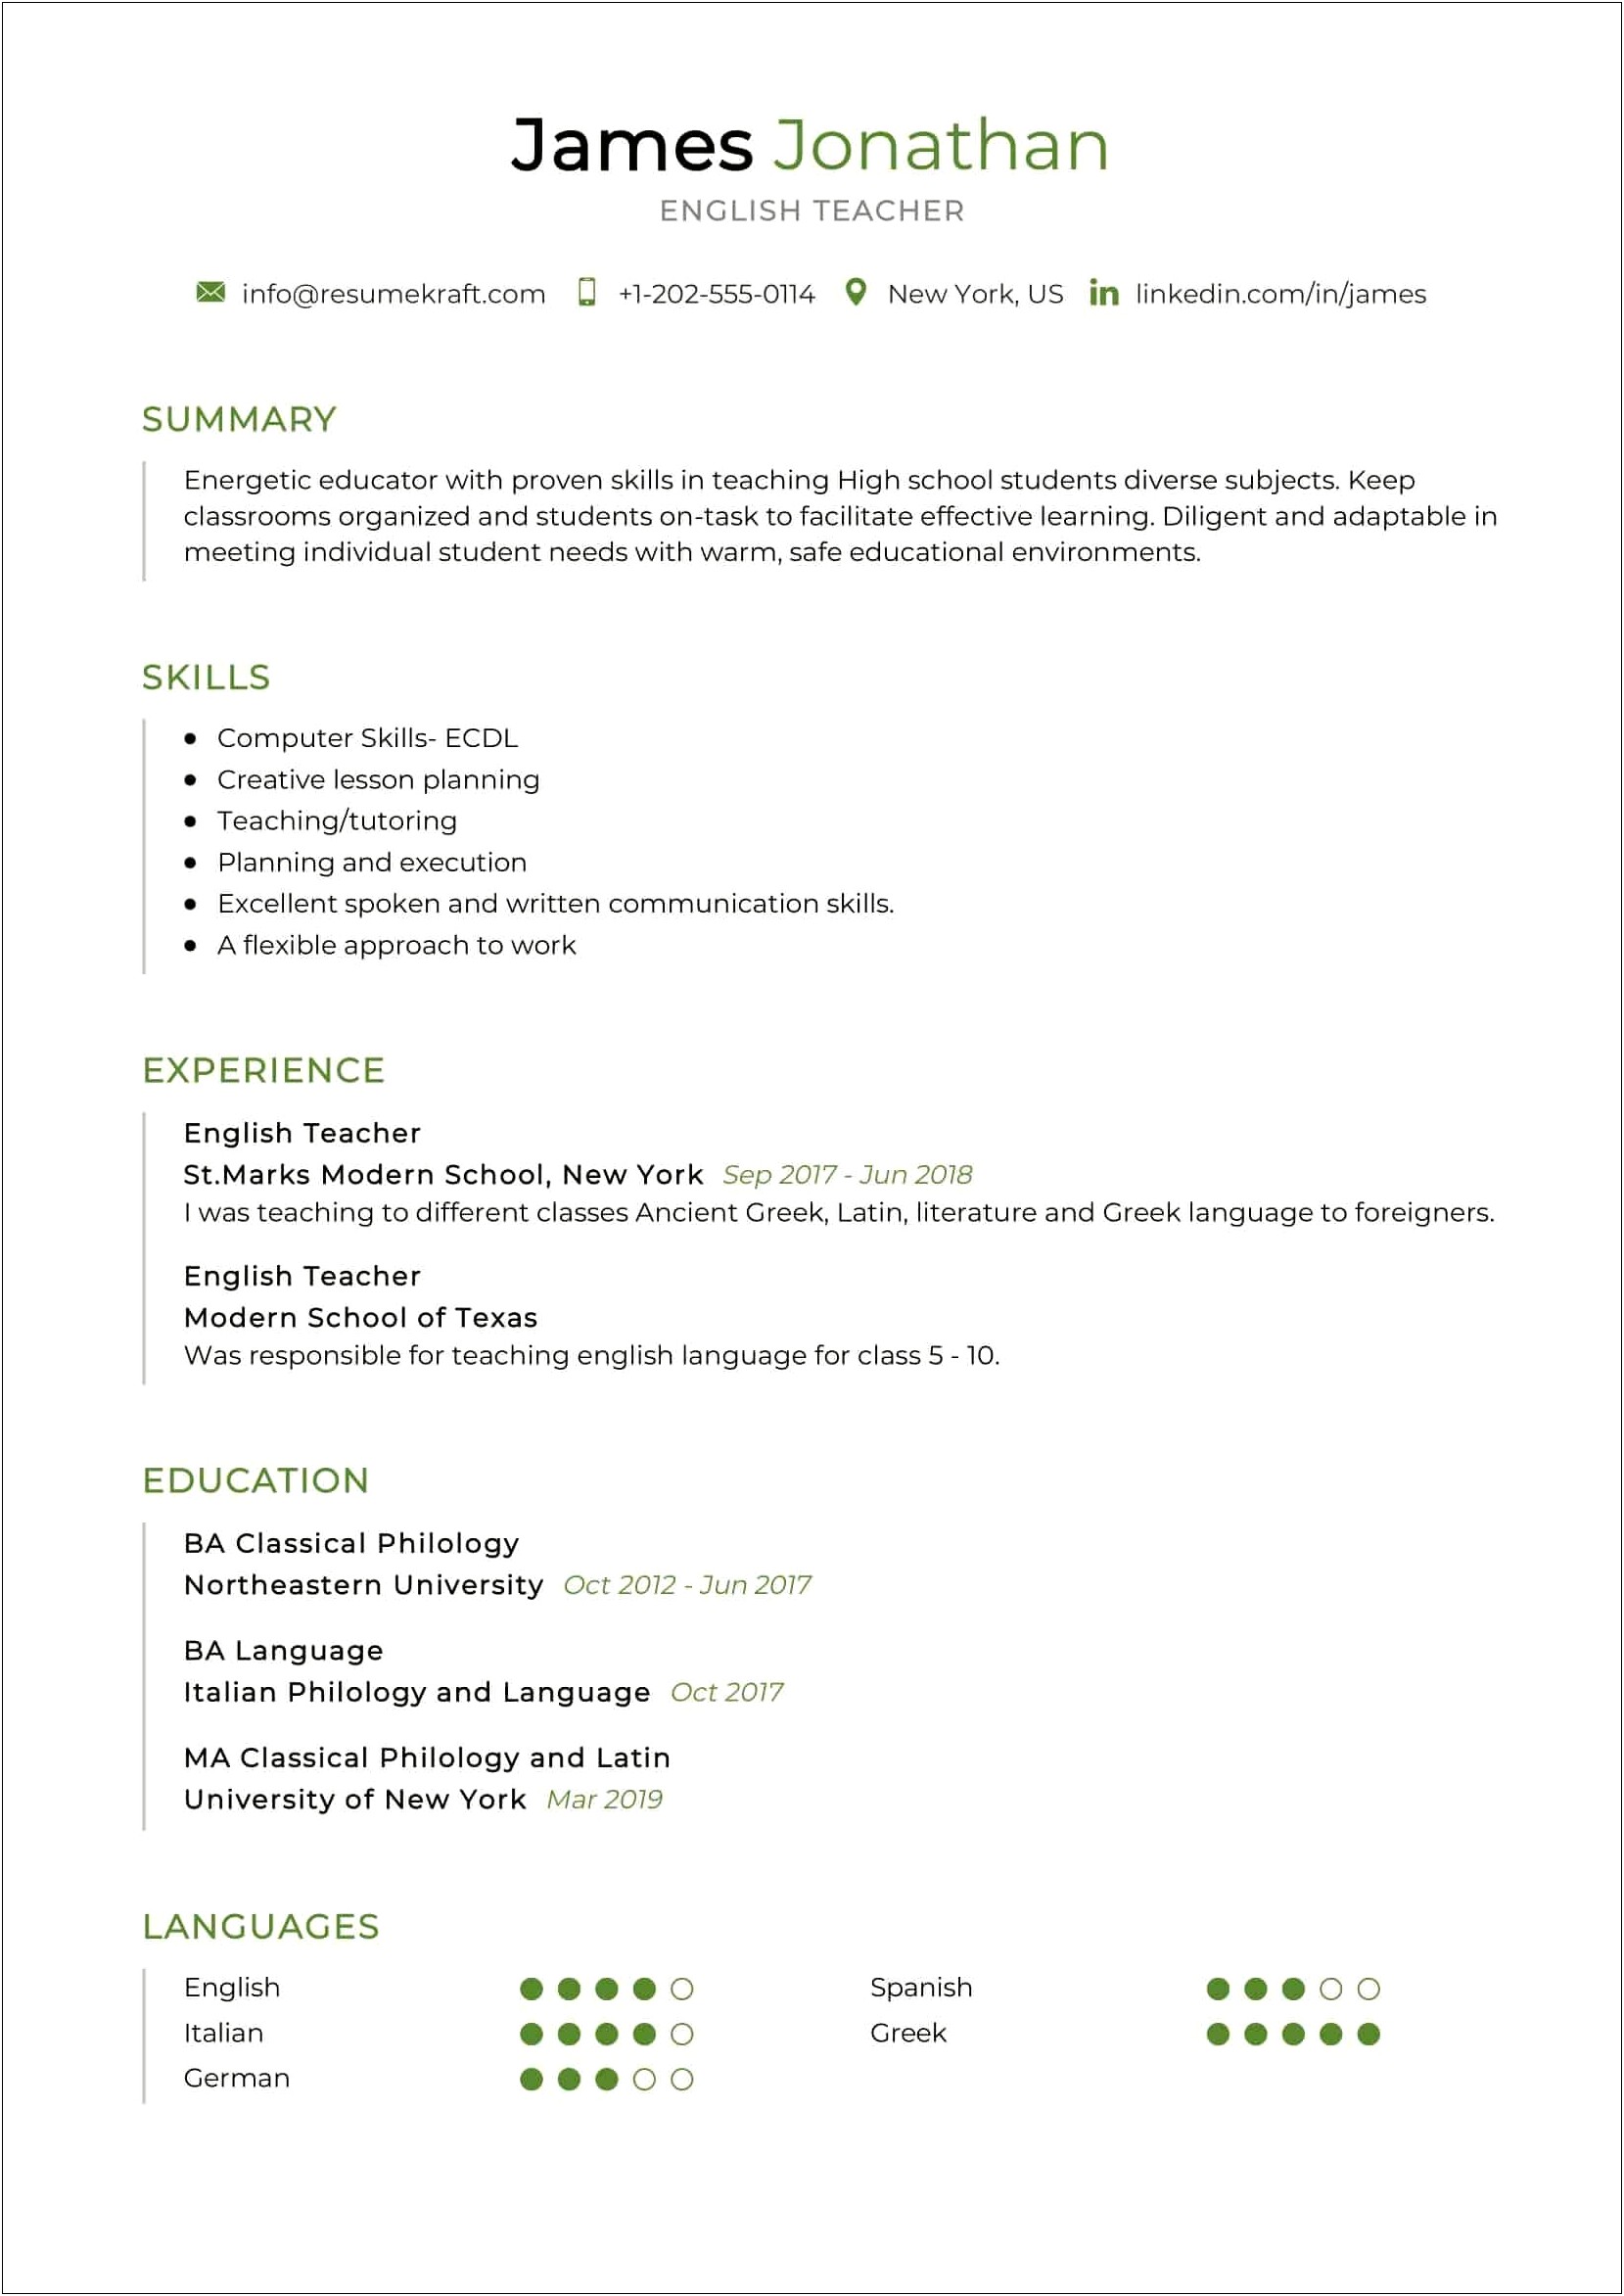 Resume Assignment For High School Students